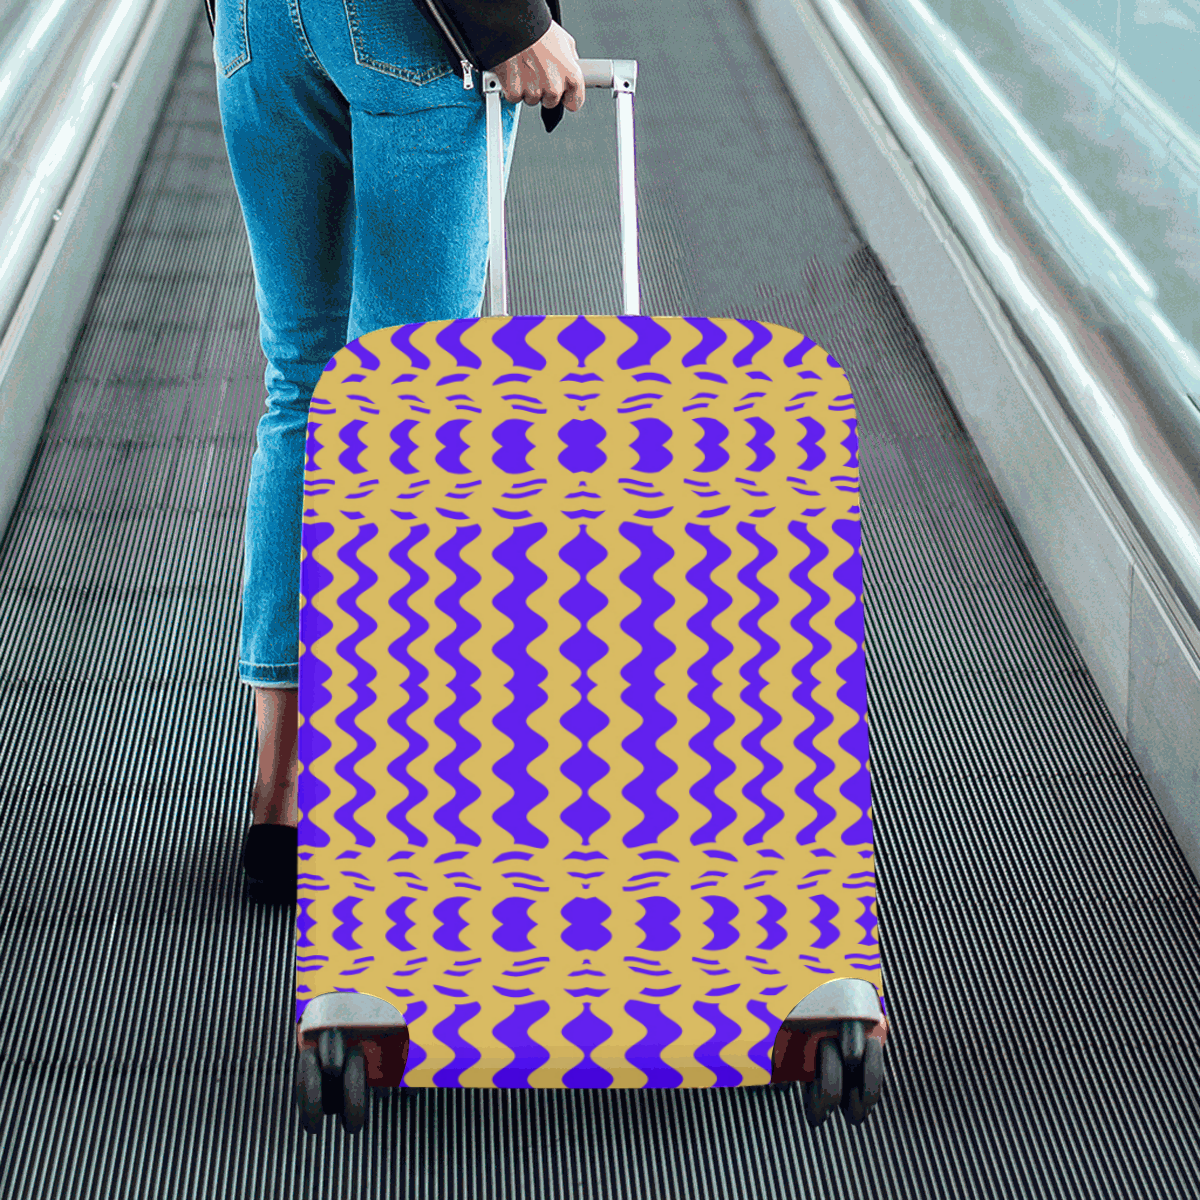 Purple Yellow Modern  Waves Lines Luggage Cover/Large 26"-28"